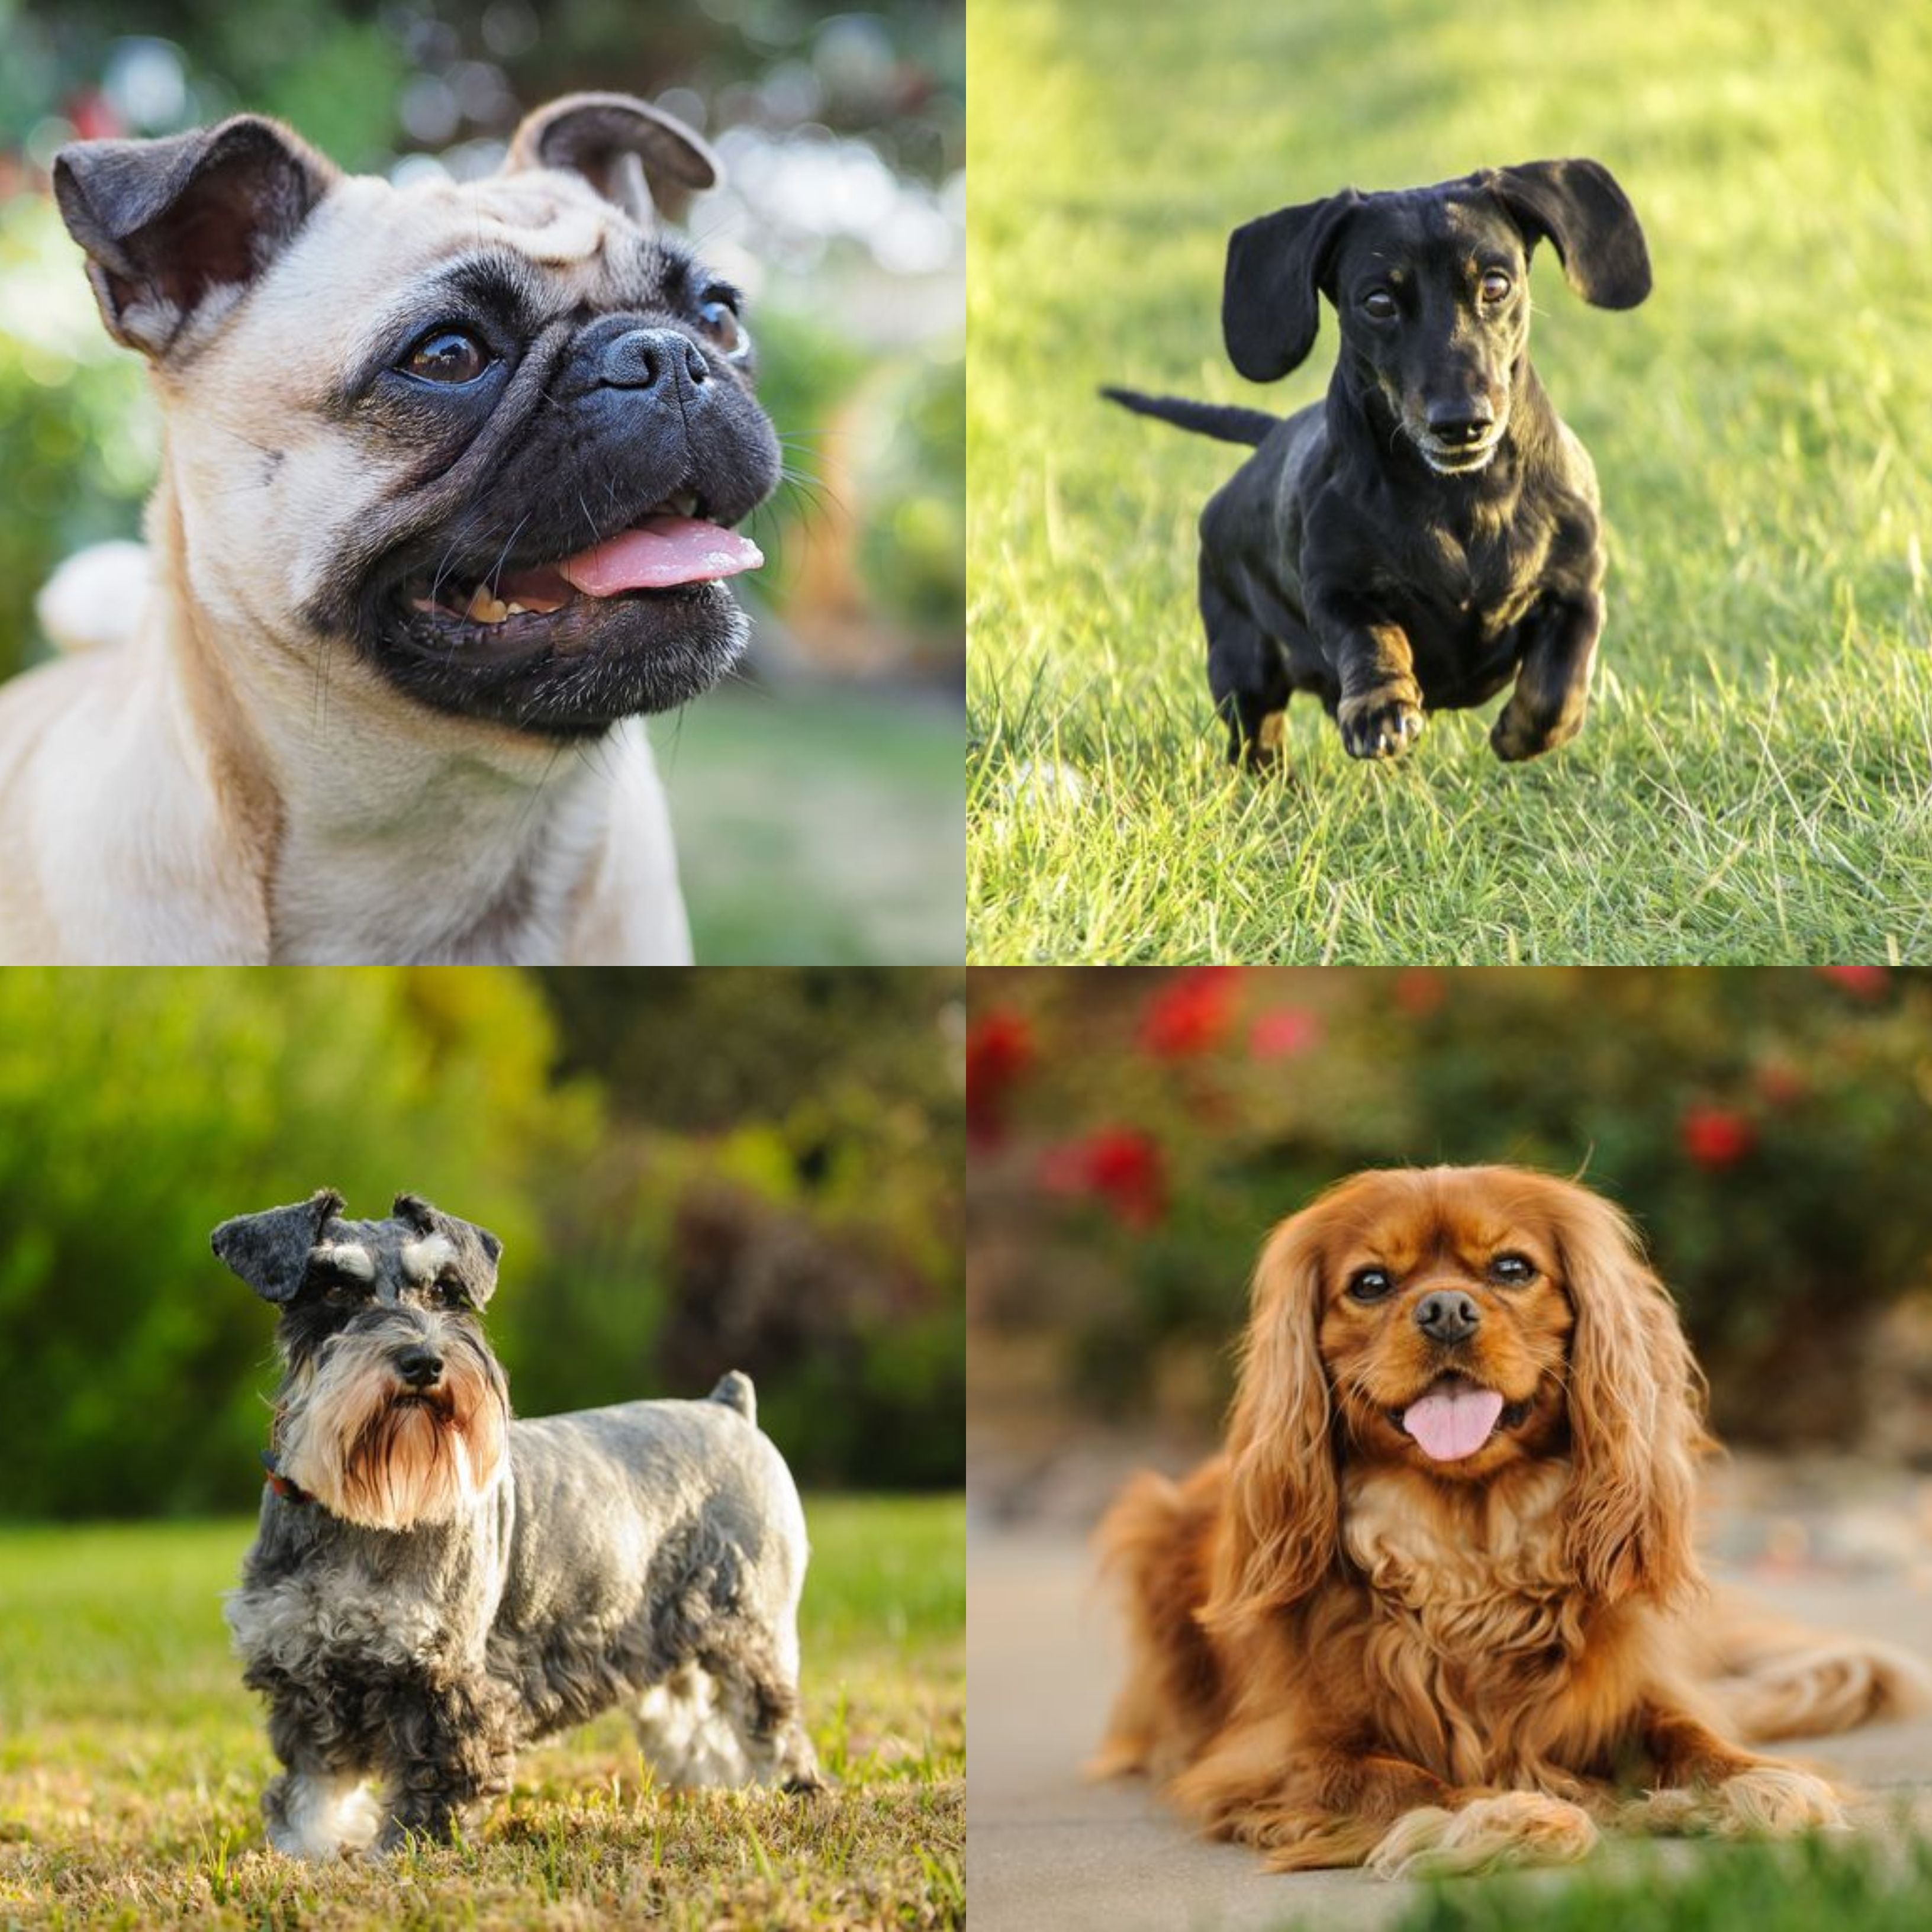 what is the smallest miniature dog breed